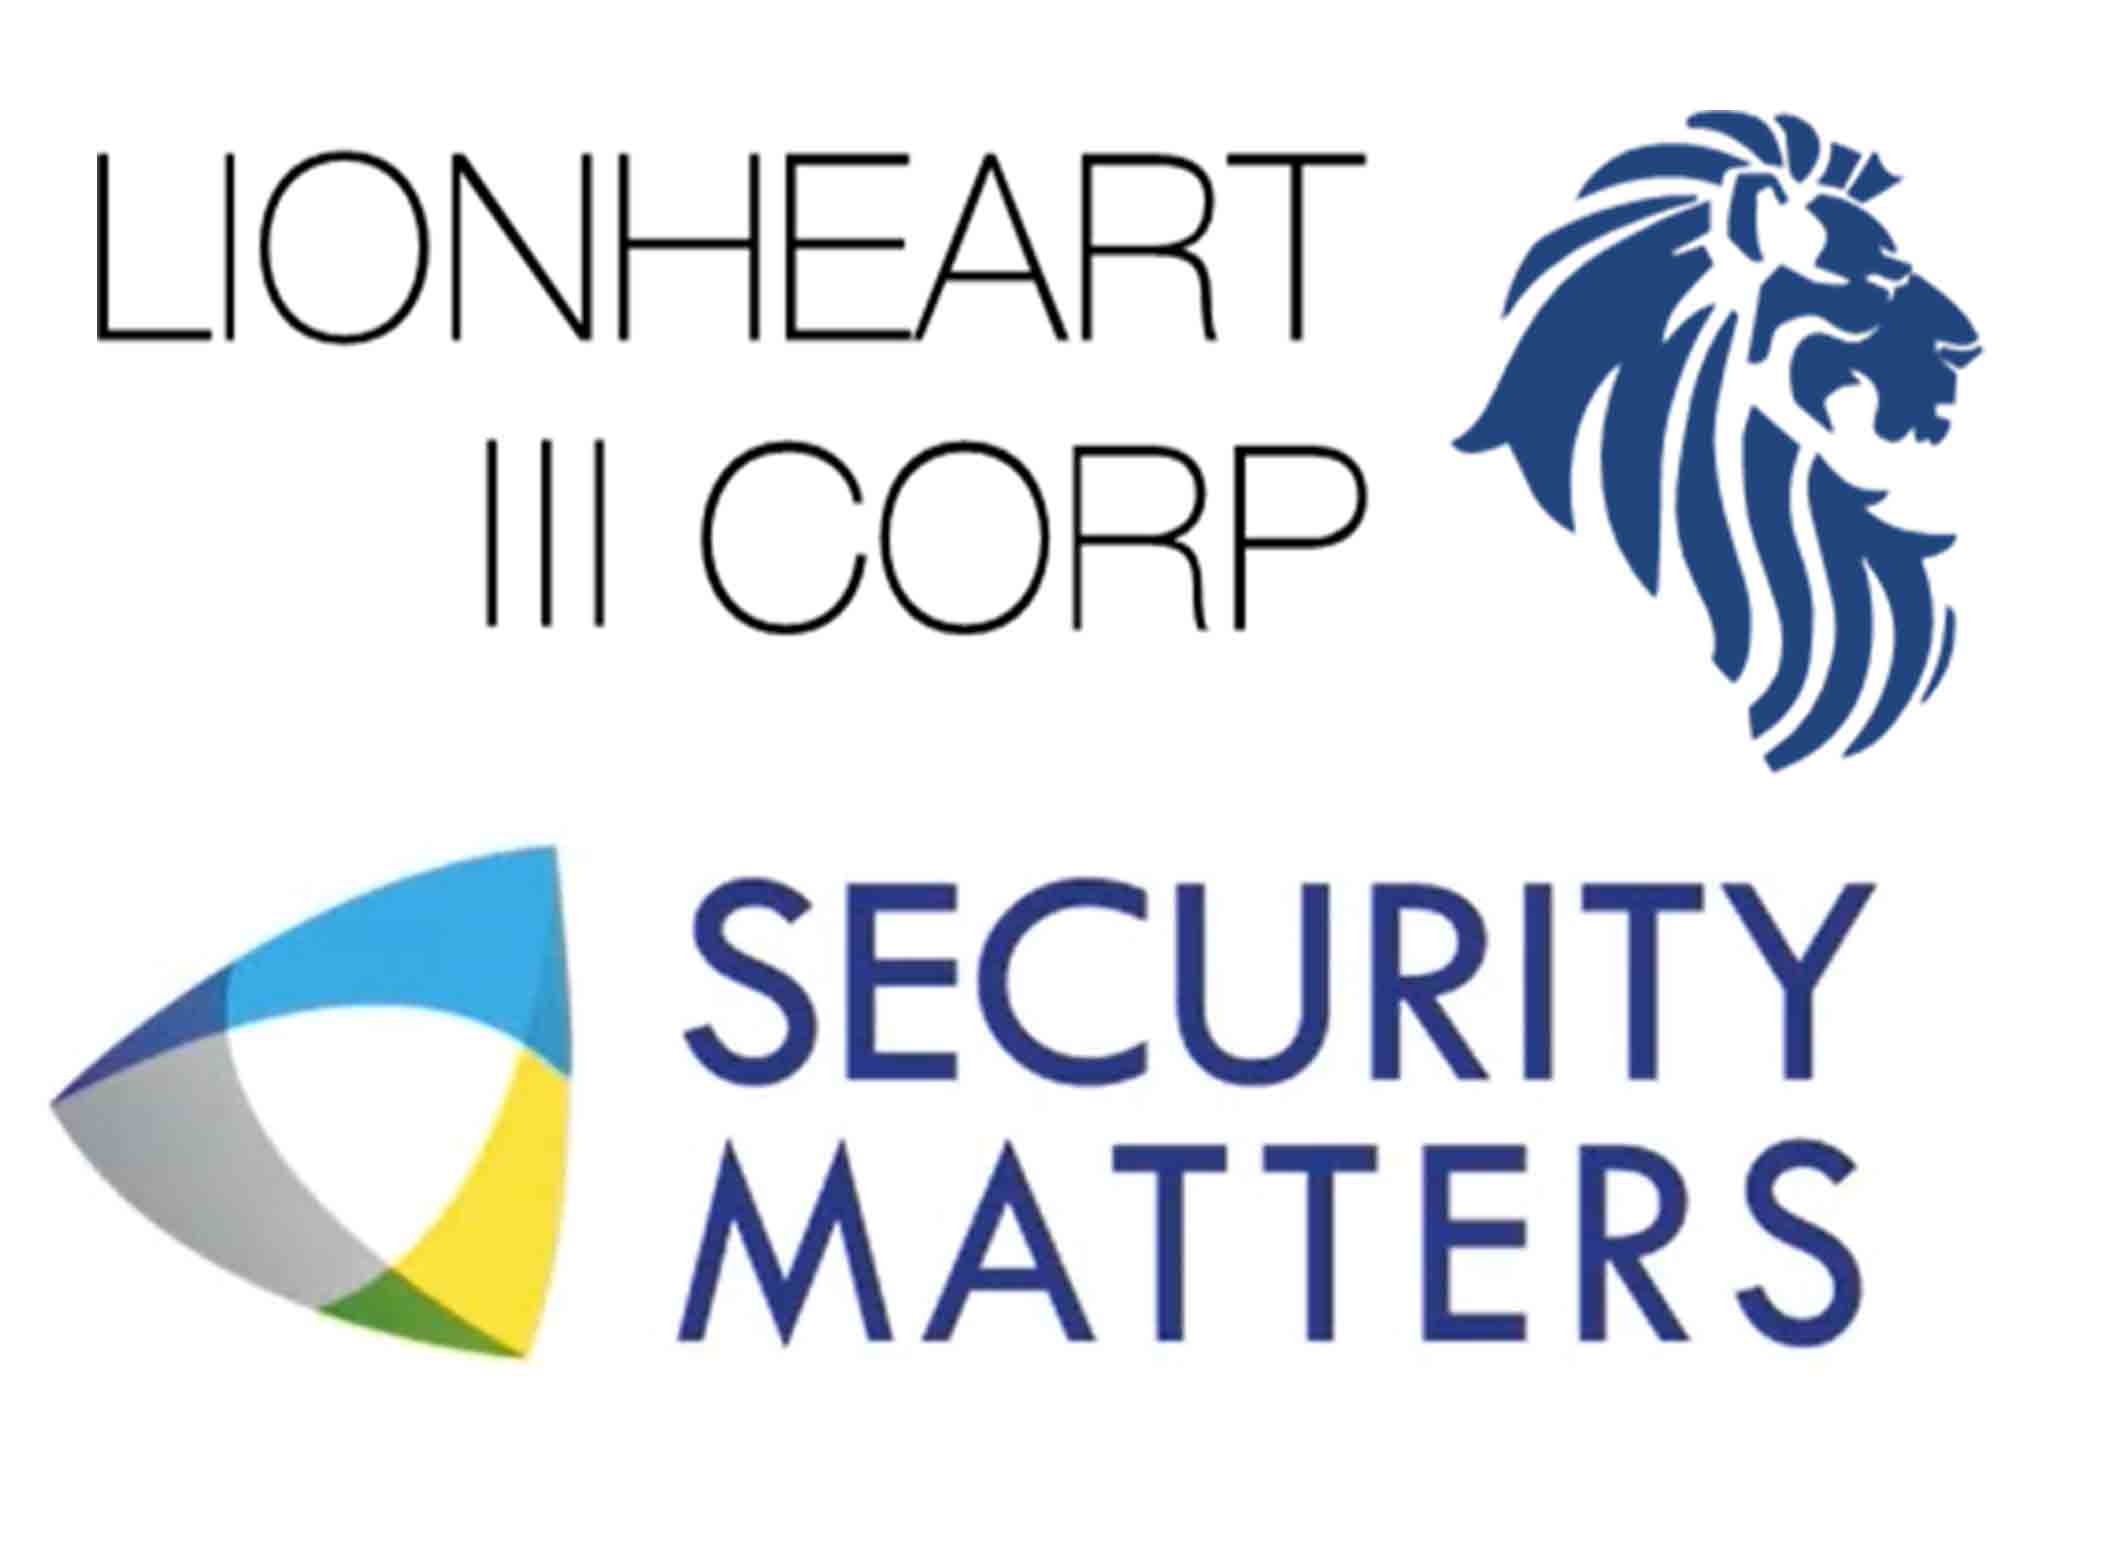 Announced: Security Matters Limited Merger with Lionheart III Corp | Transaction History